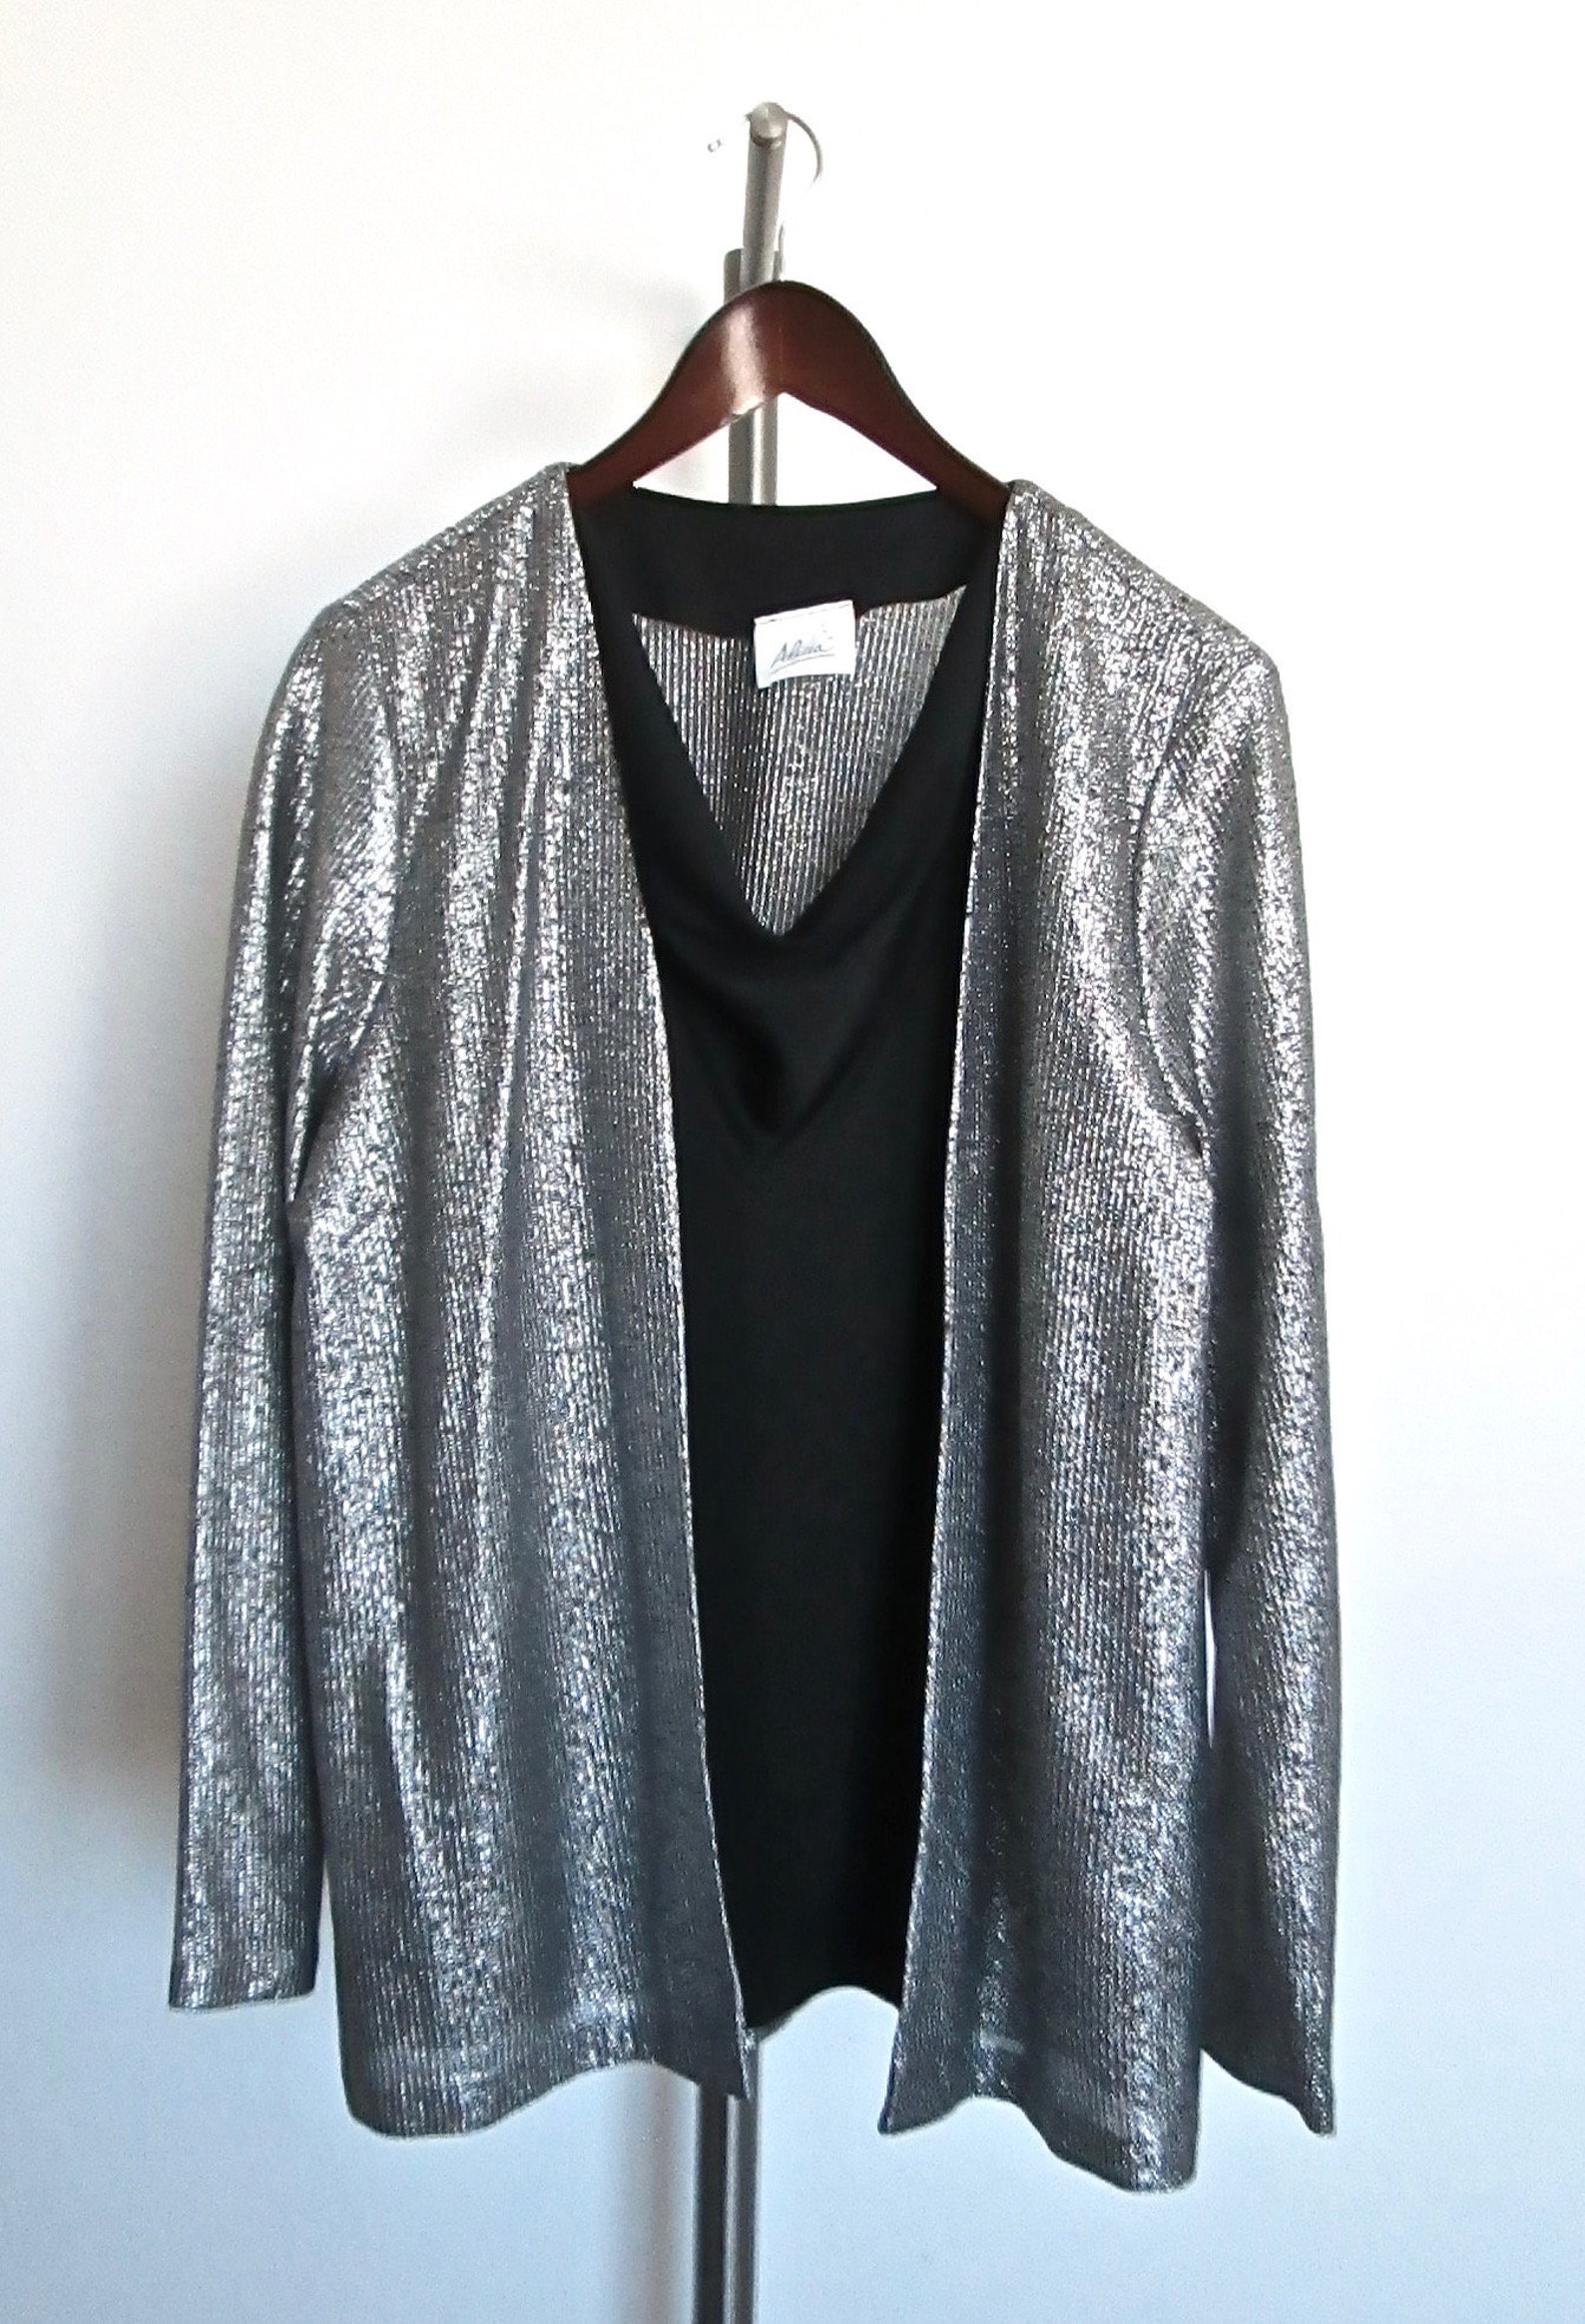 Vintage 1980's SILVER SPARKLE cardigan with black shell | Etsy